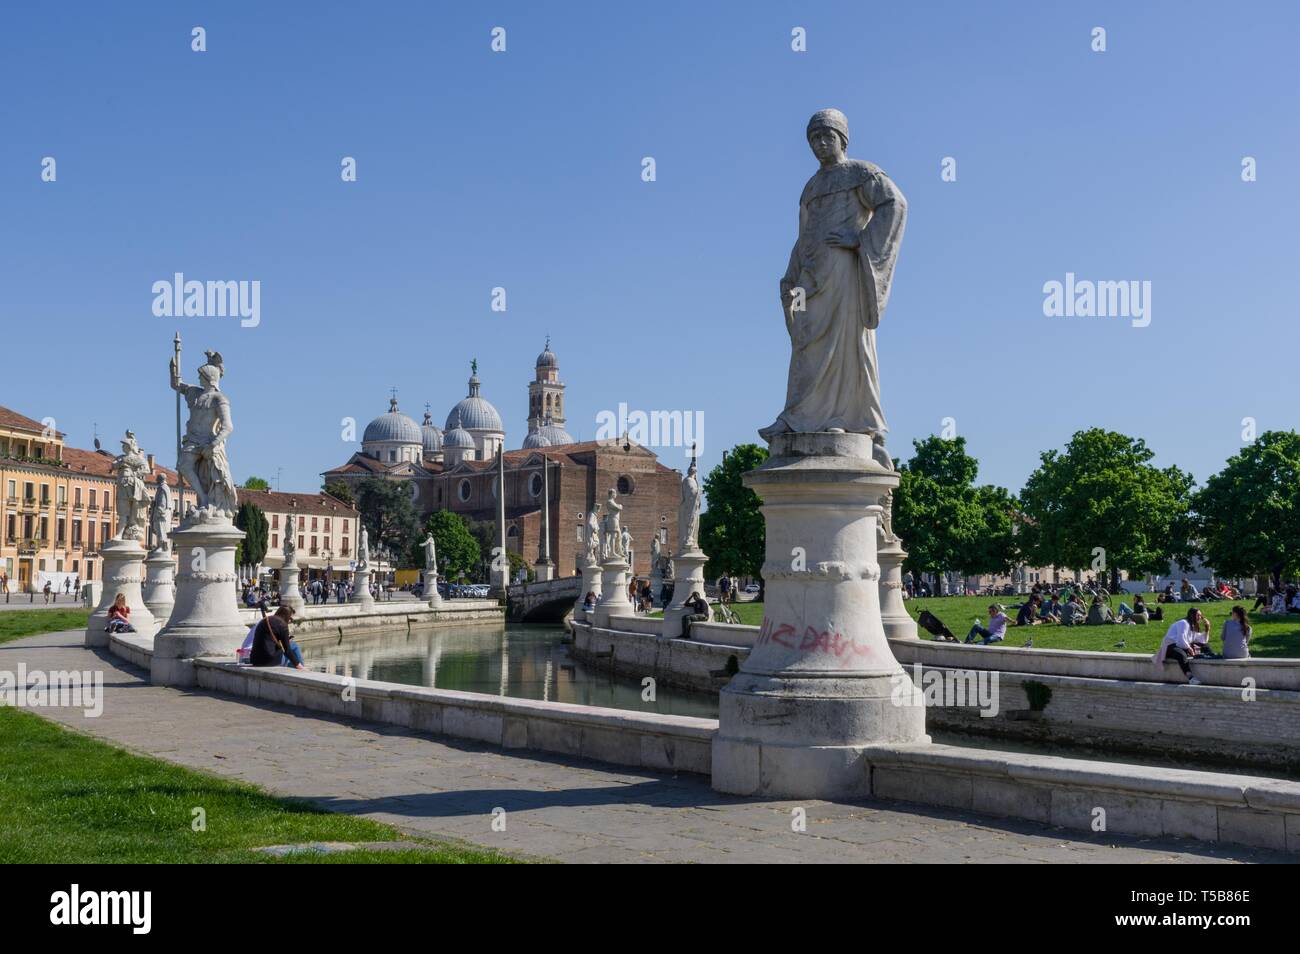 Padova, Italy (19th April 2019) - Prato della Valle square surrounded by statues with the Abbey of Santa Giustina in the background Stock Photo